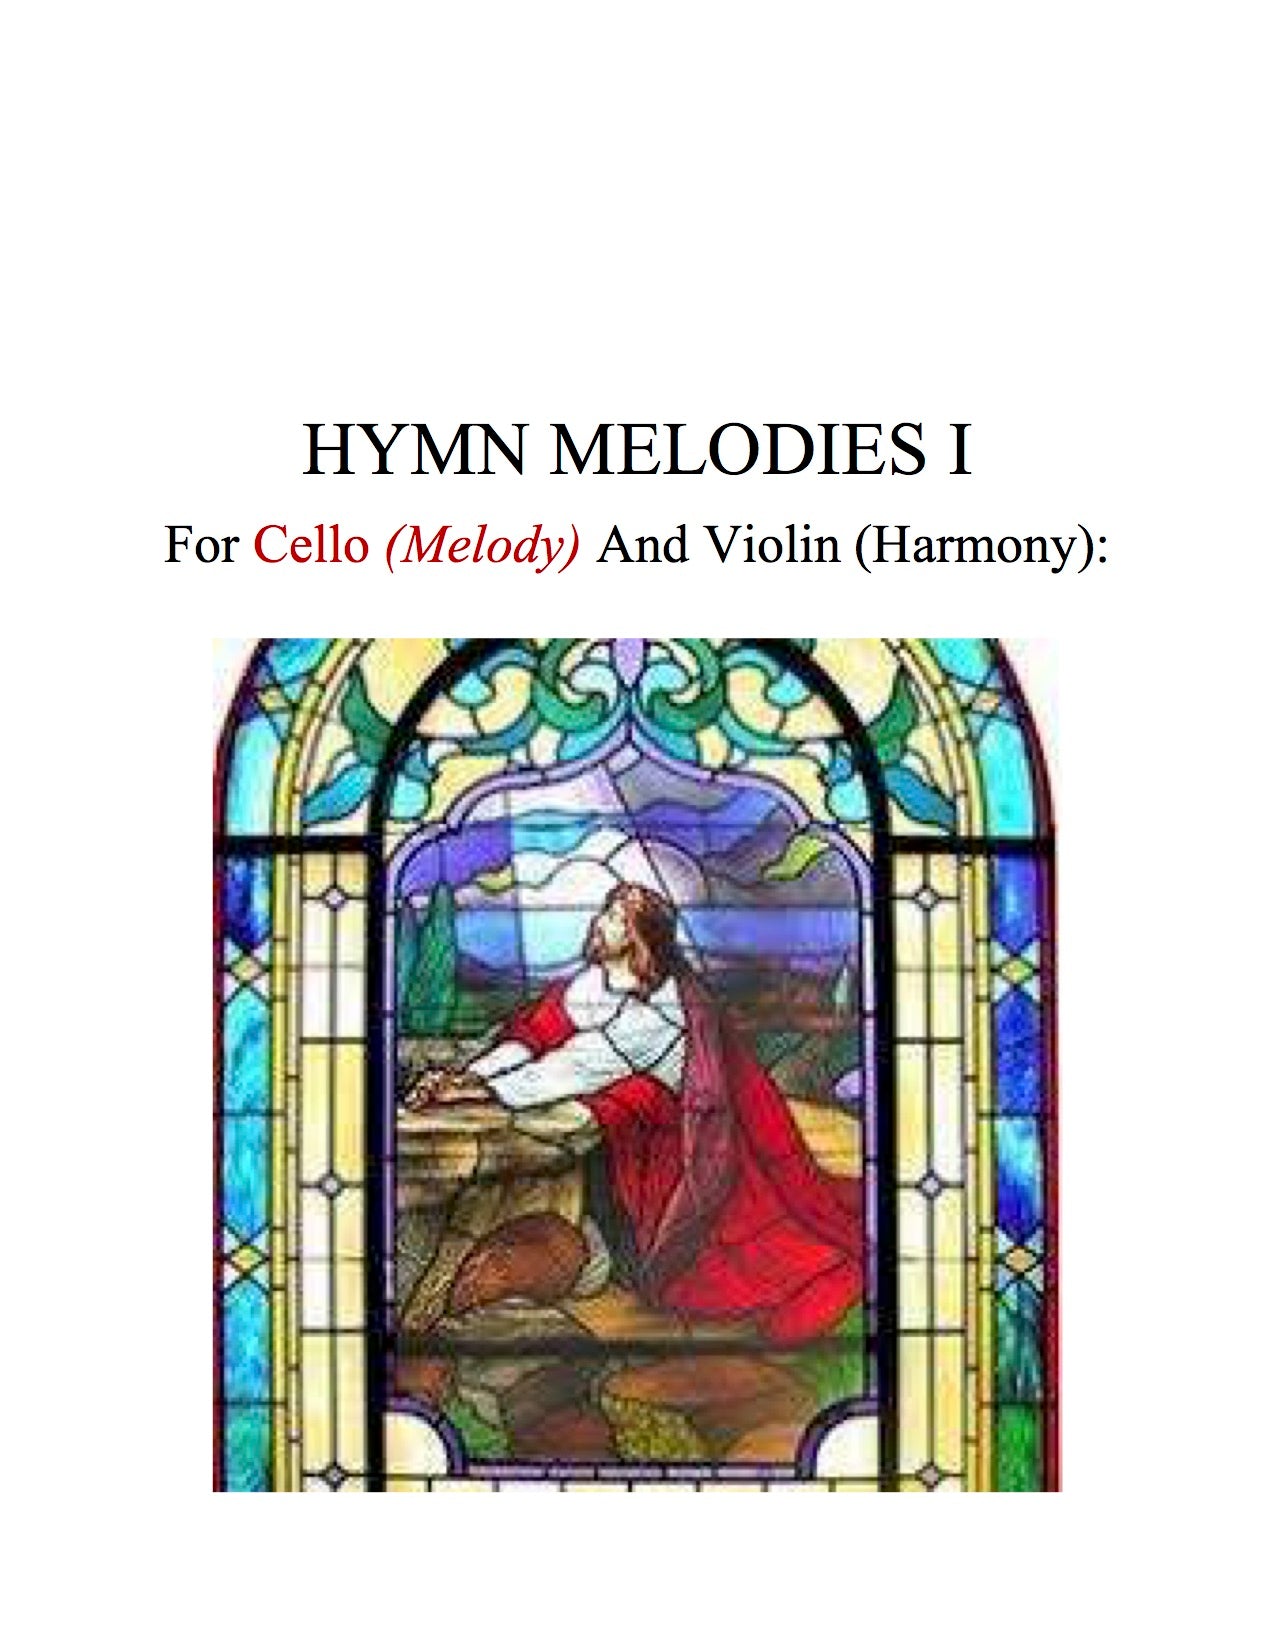 093 - Hymn Melodies For Cello and Violin, Volume I